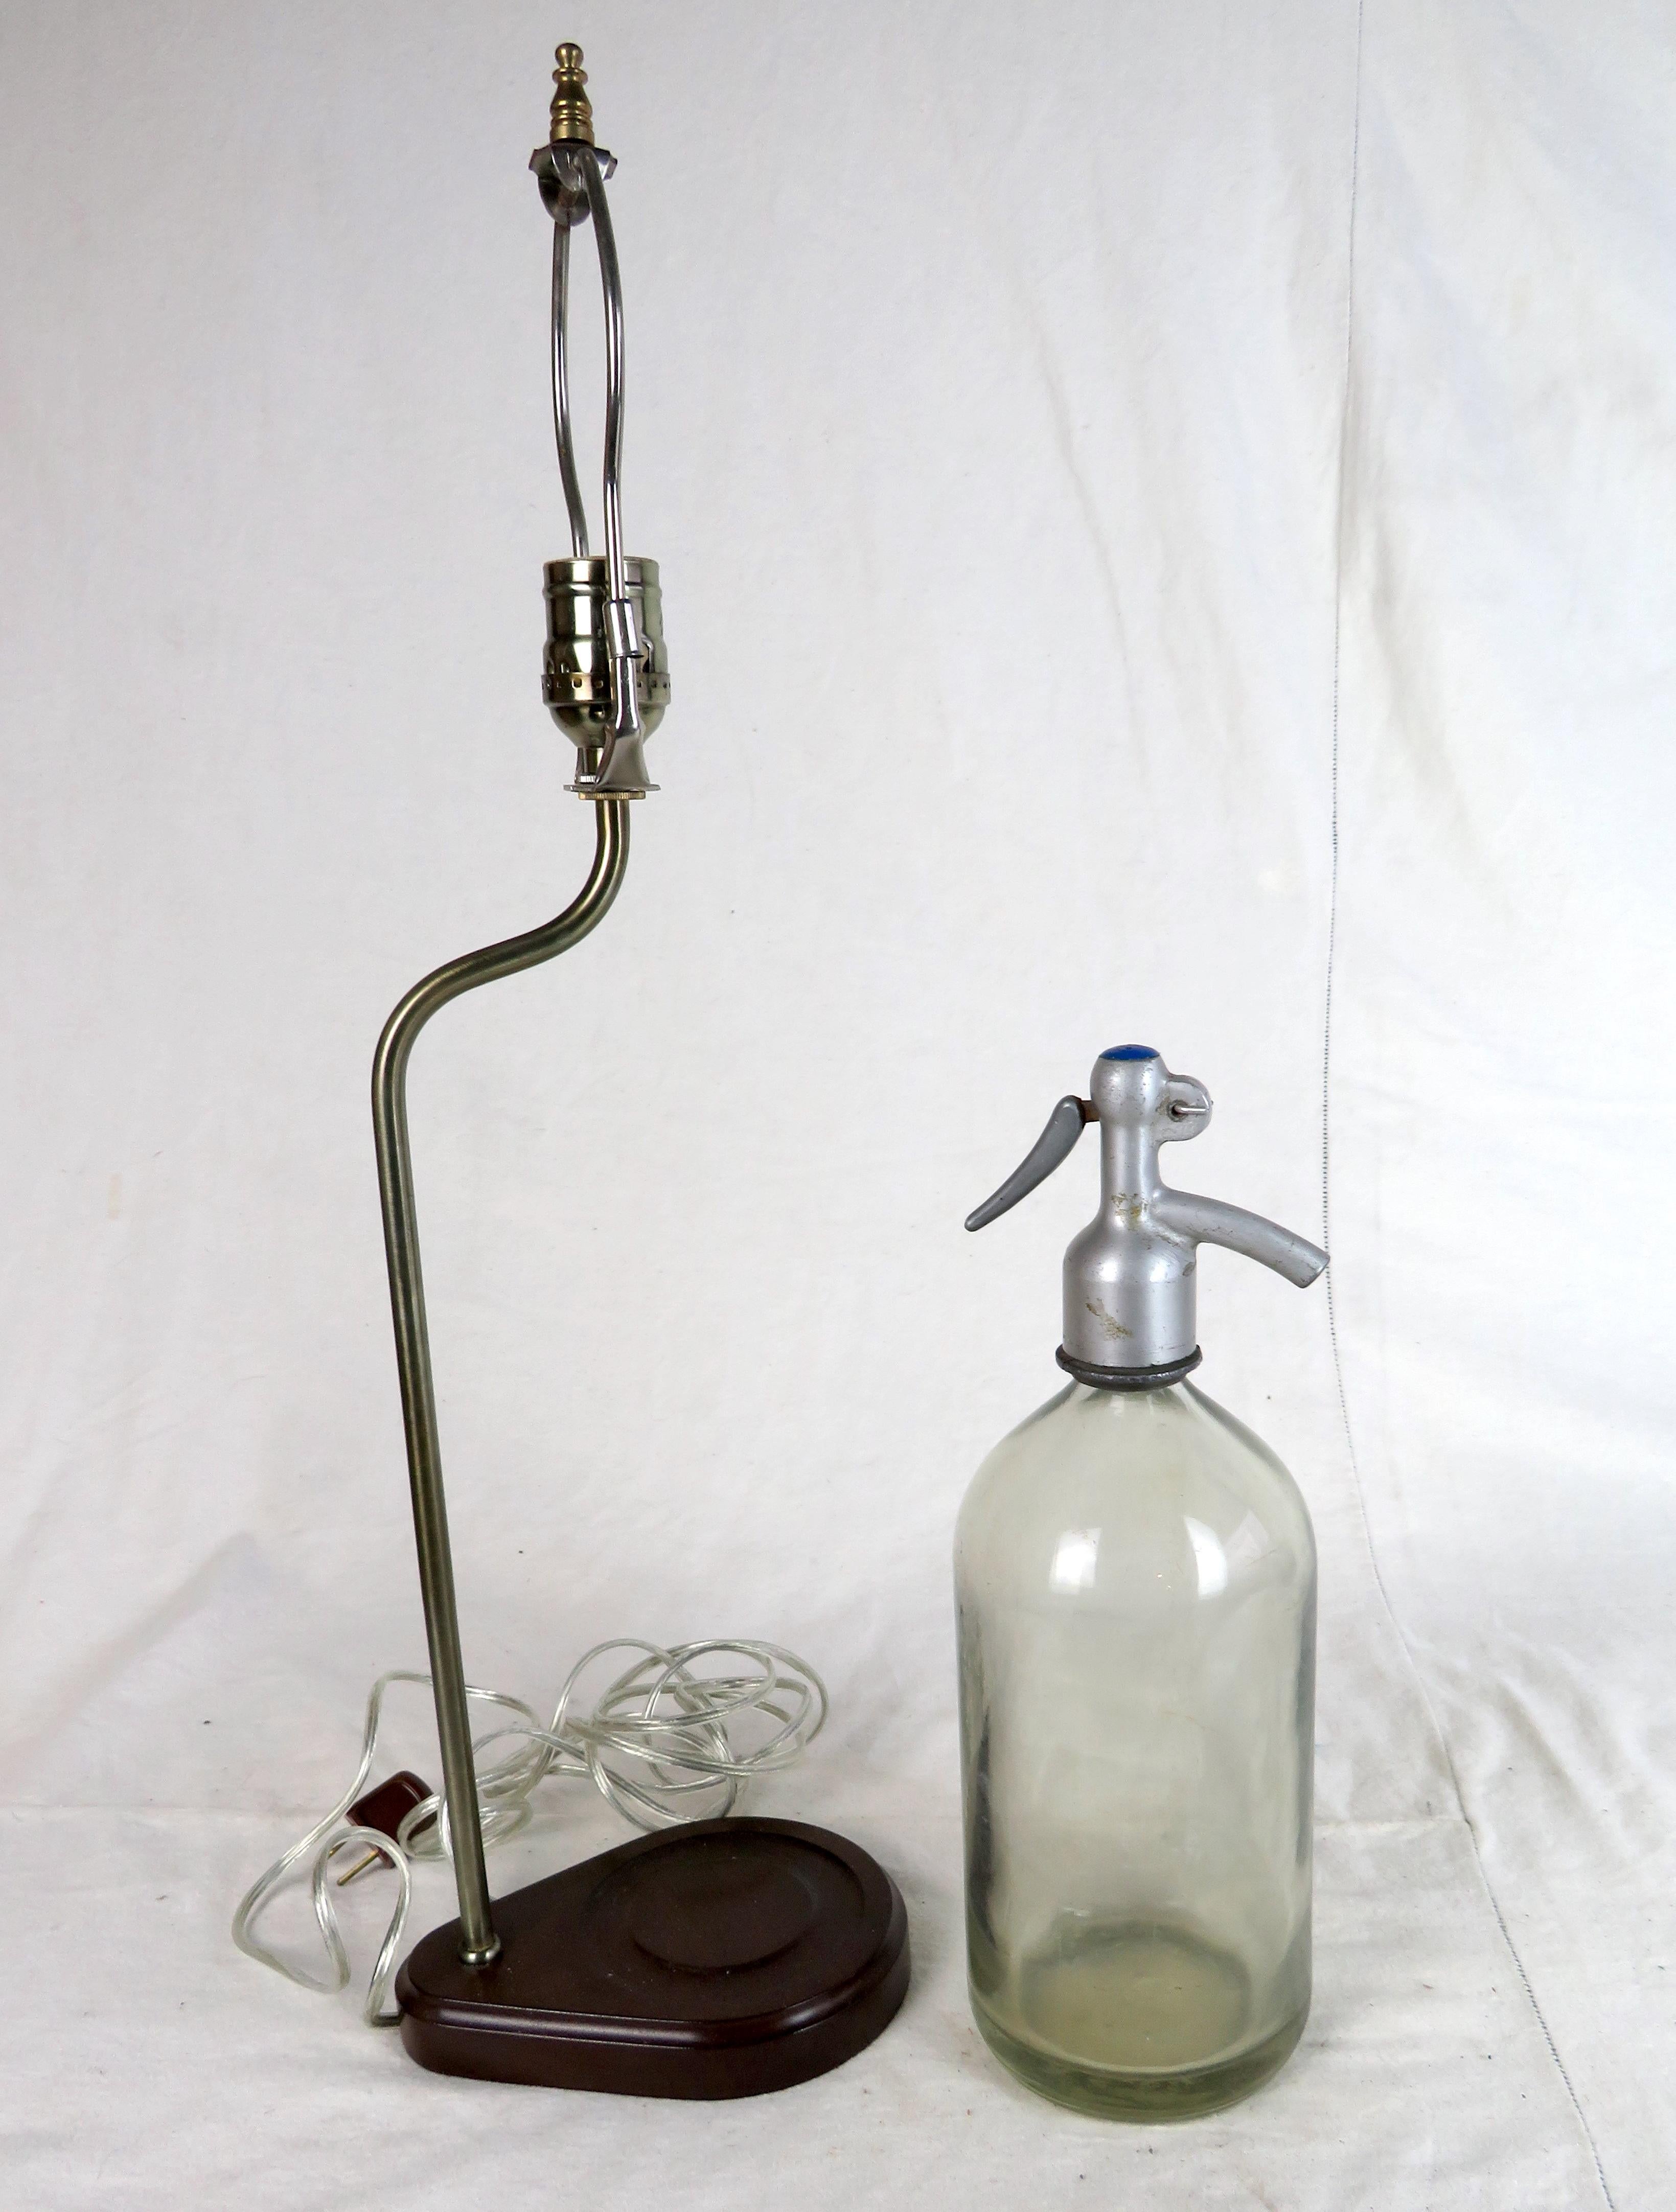 Vintage green glass seltzer bottle converted to lamp. Sits on custom wooden base mounted with lamp arm and accompanying shade. Great addition to any home bar.